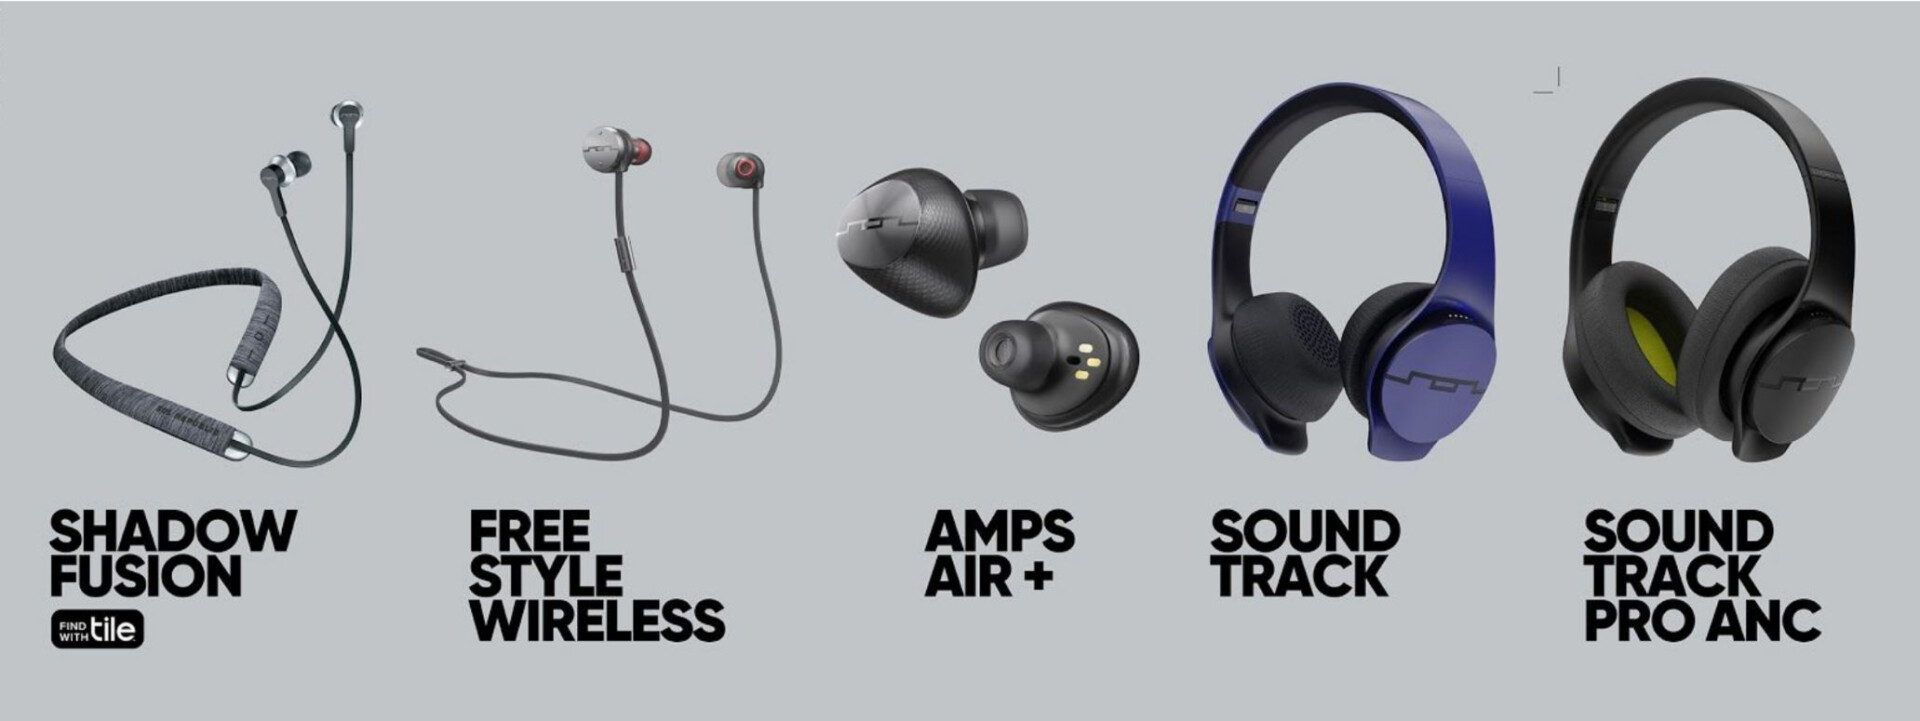 Sol Republic new wireless lineup from CES 2019 product image on gray background.